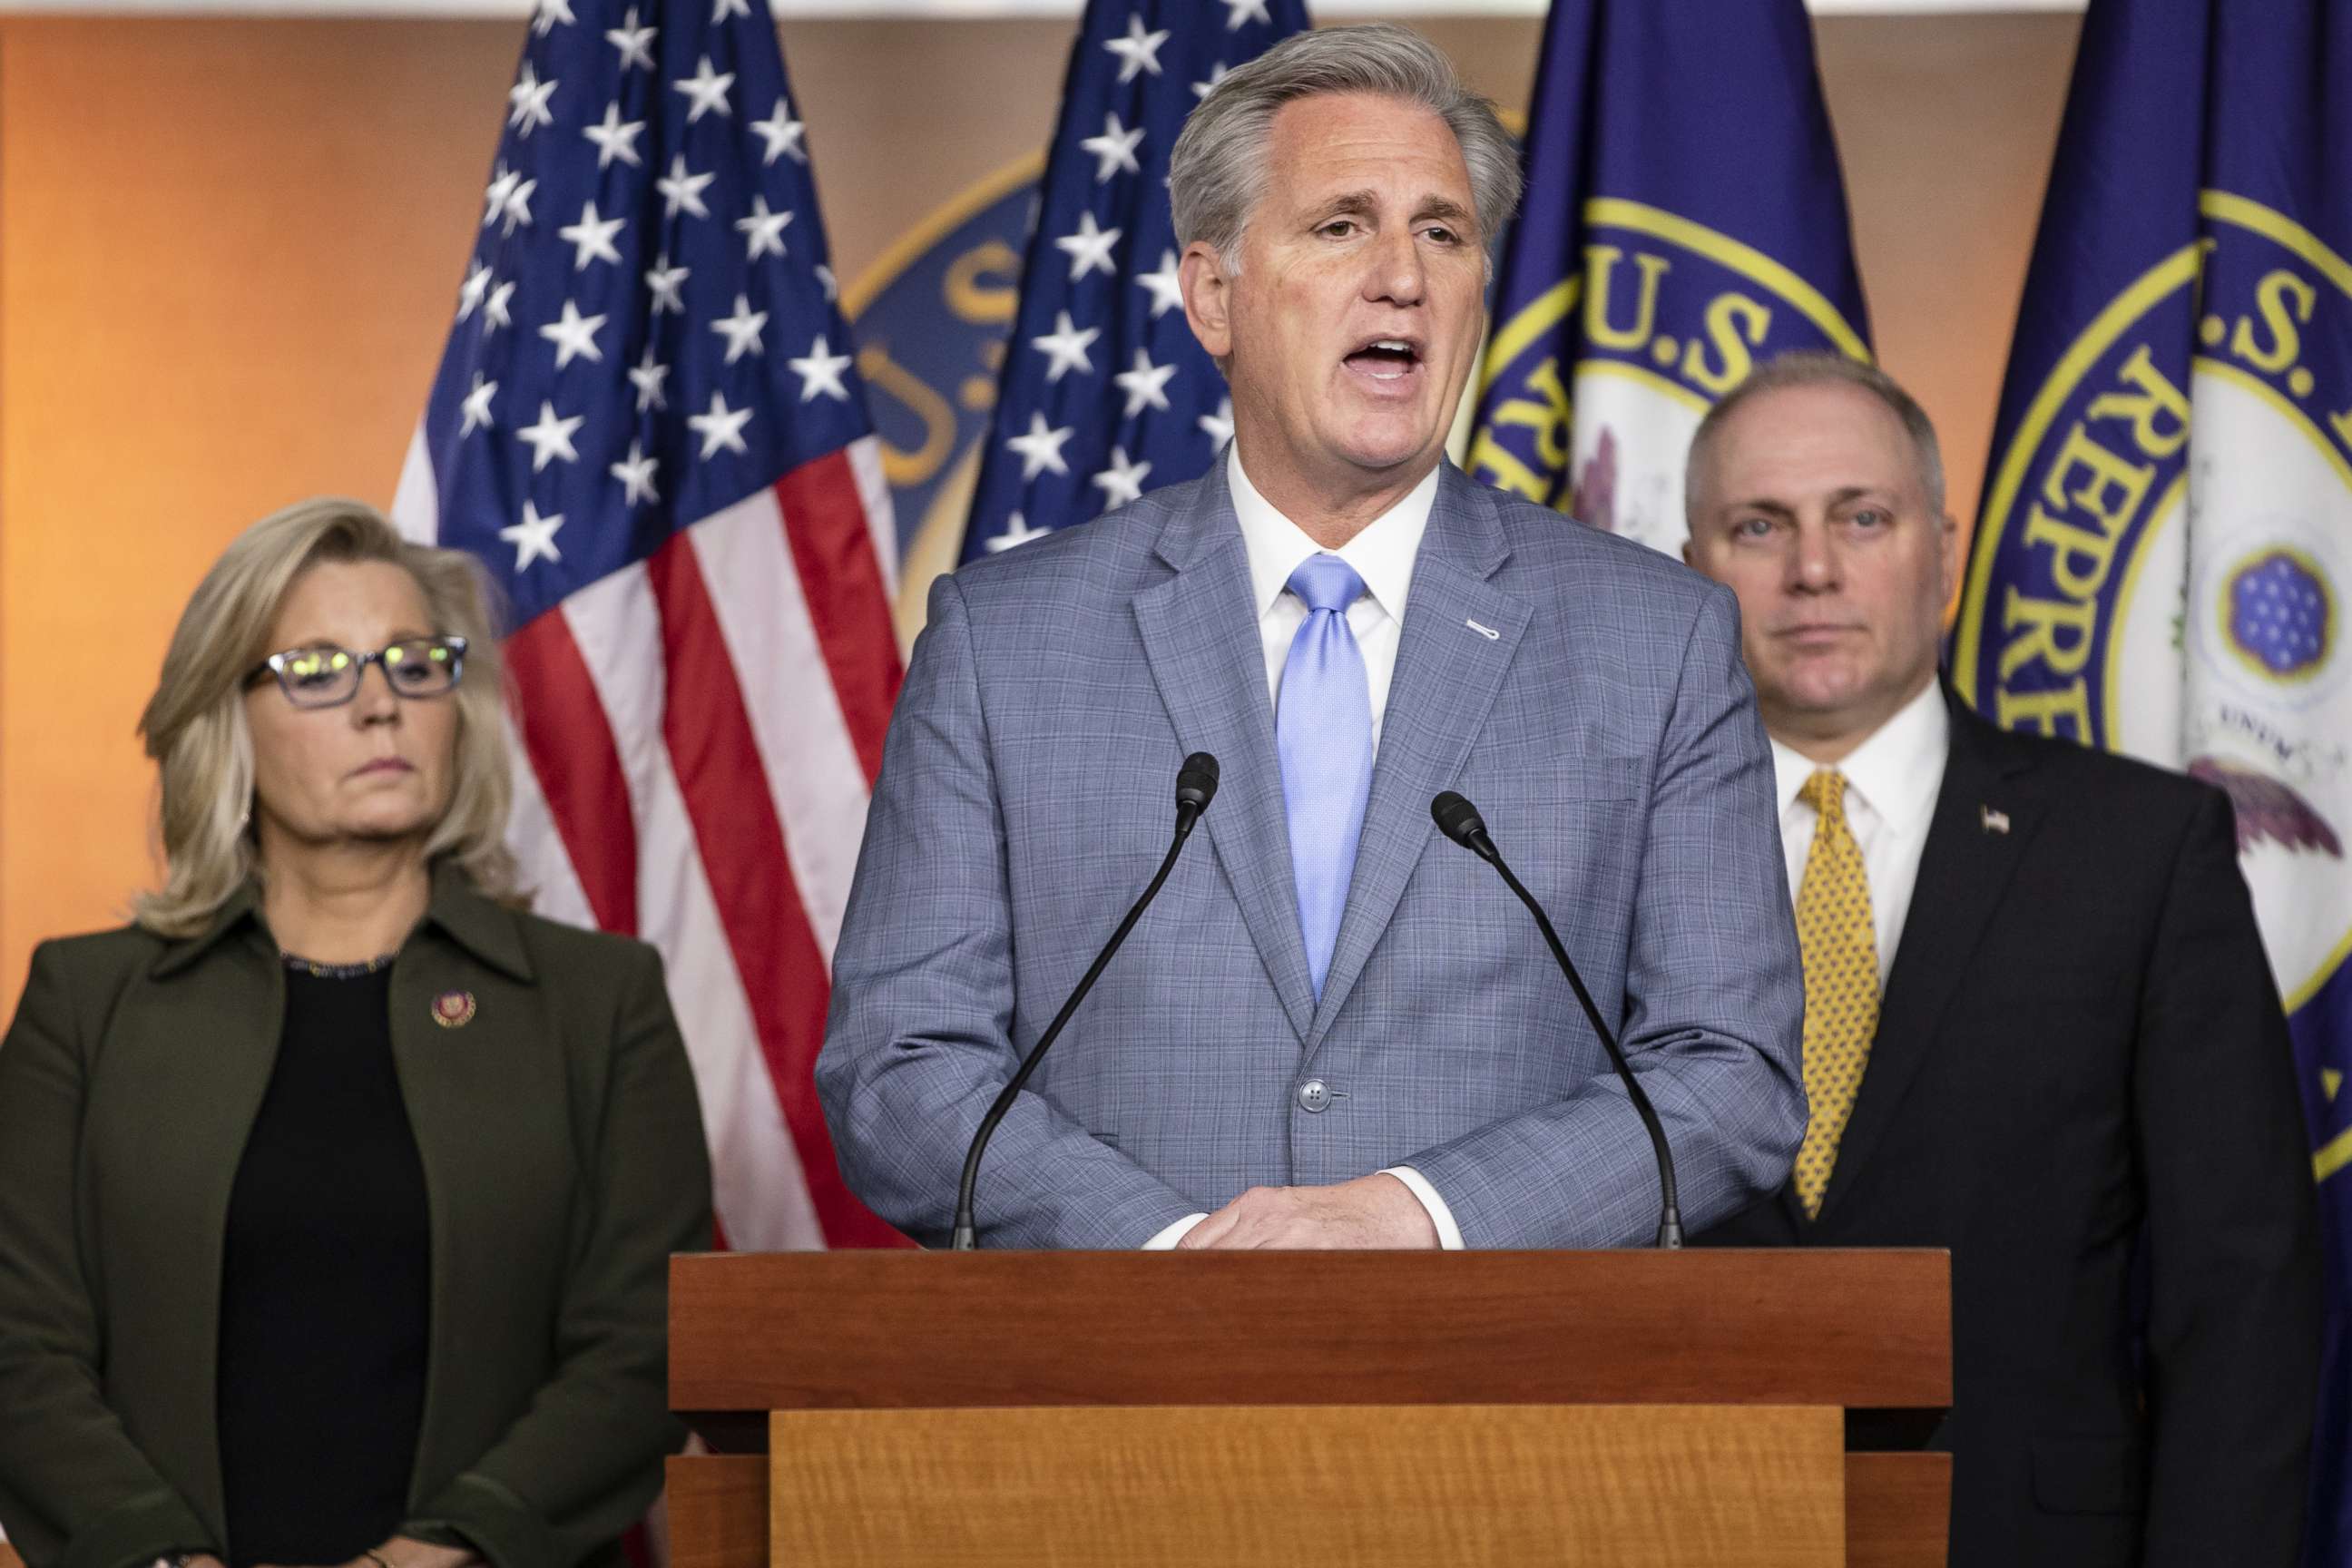 PHOTO: House Minority Leader Rep. Kevin McCarthy speaks during a press conference with Republican Conference Chairman Rep. Liz Cheney and Republican Whip Rep. Steve Scalise at the Capitol, Dec. 17, 2019. 